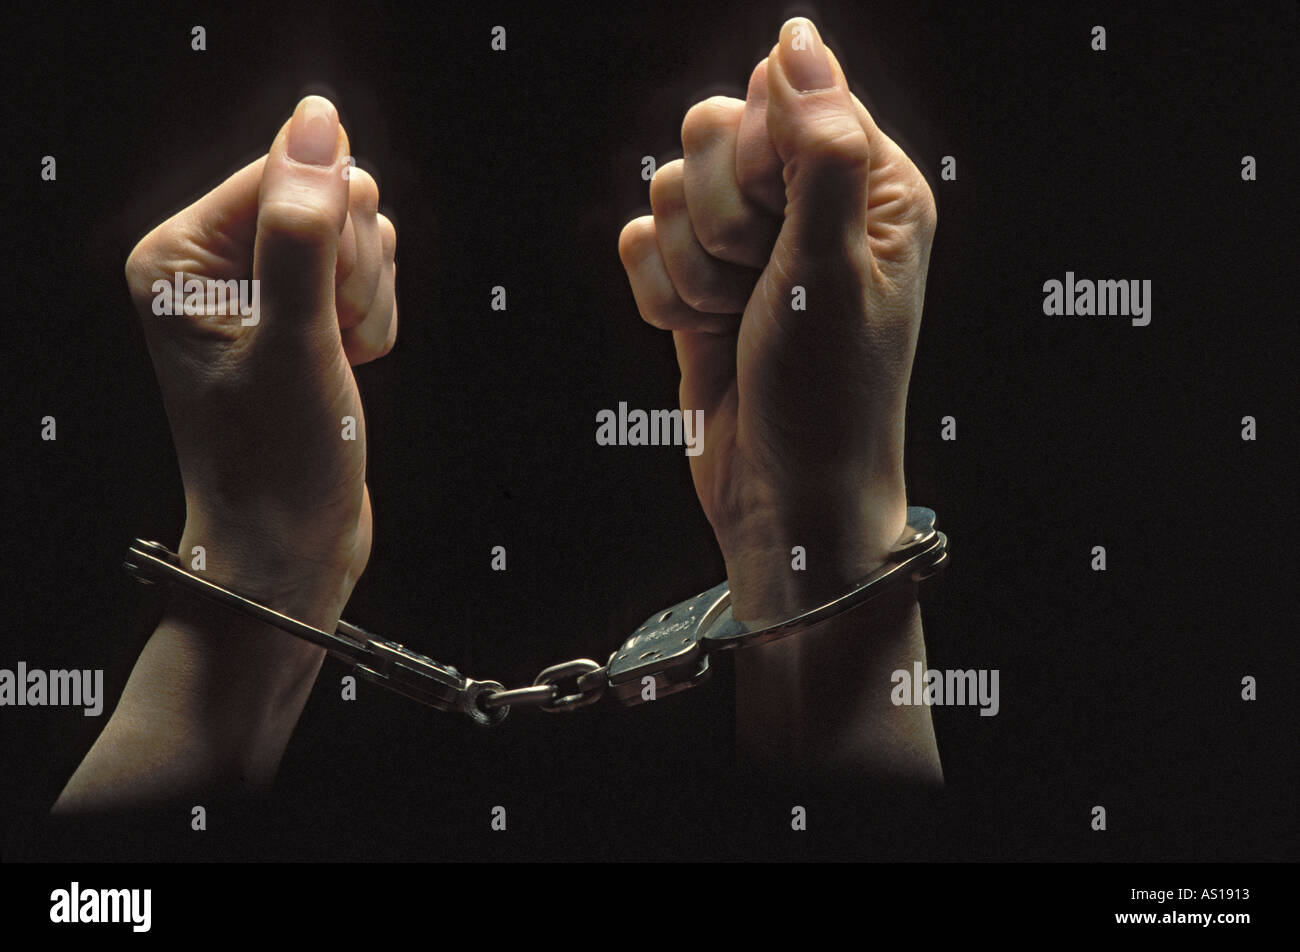 Woman's Imprisoned hands clenched in fists and handcuffed silhouetted on black background Stock Photo